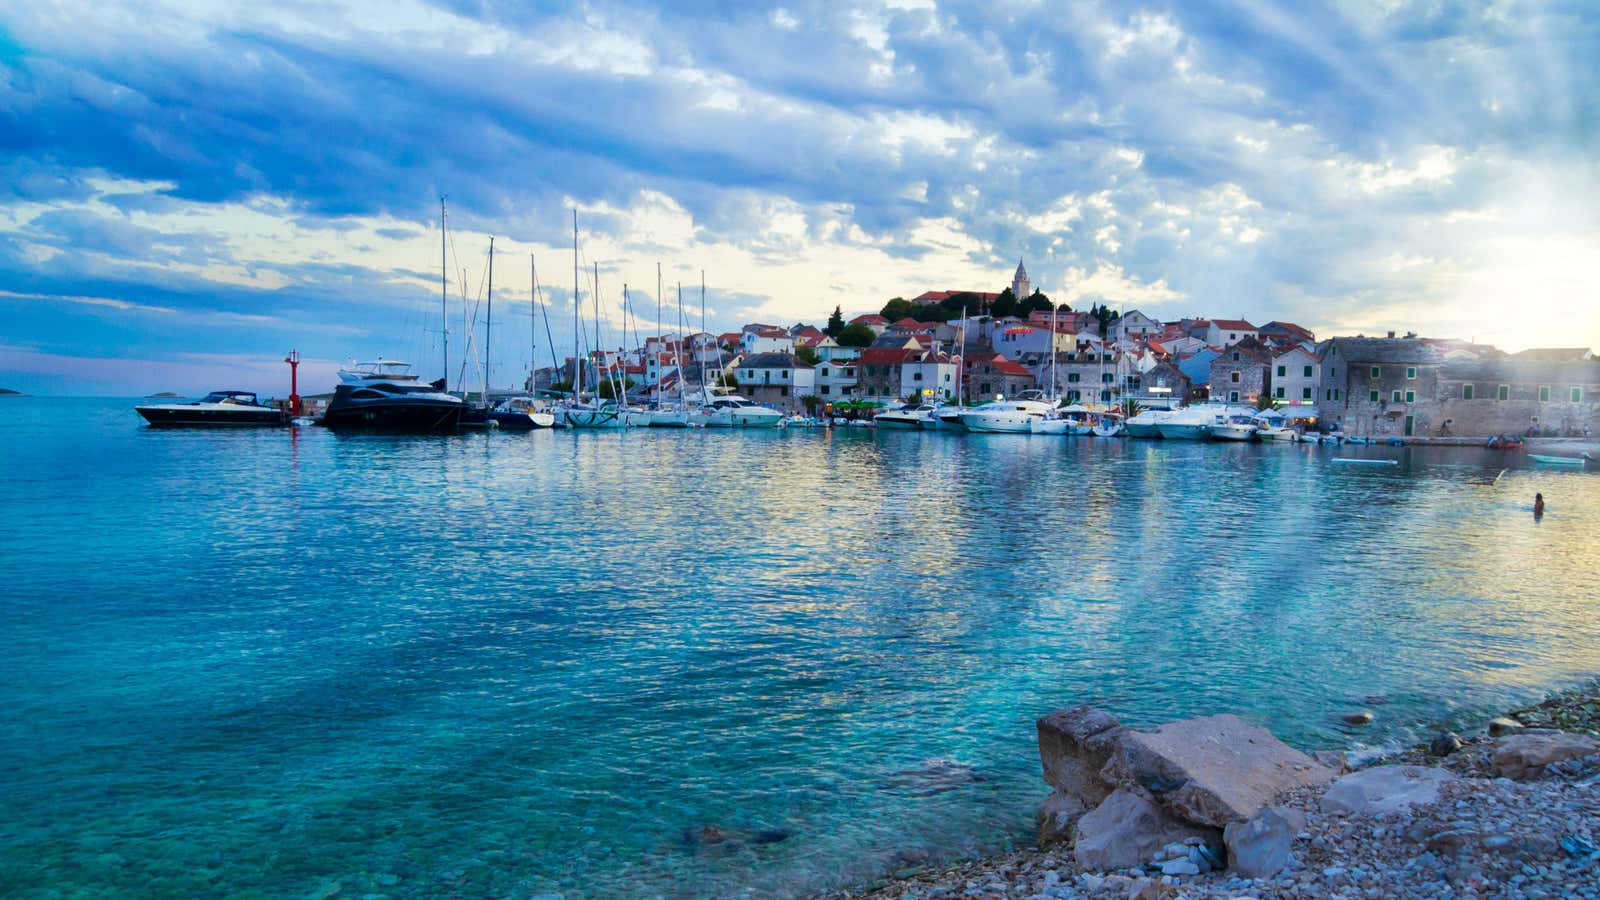 Even the islands along the Croatian coast could not prevent the country’s shrinking economy.